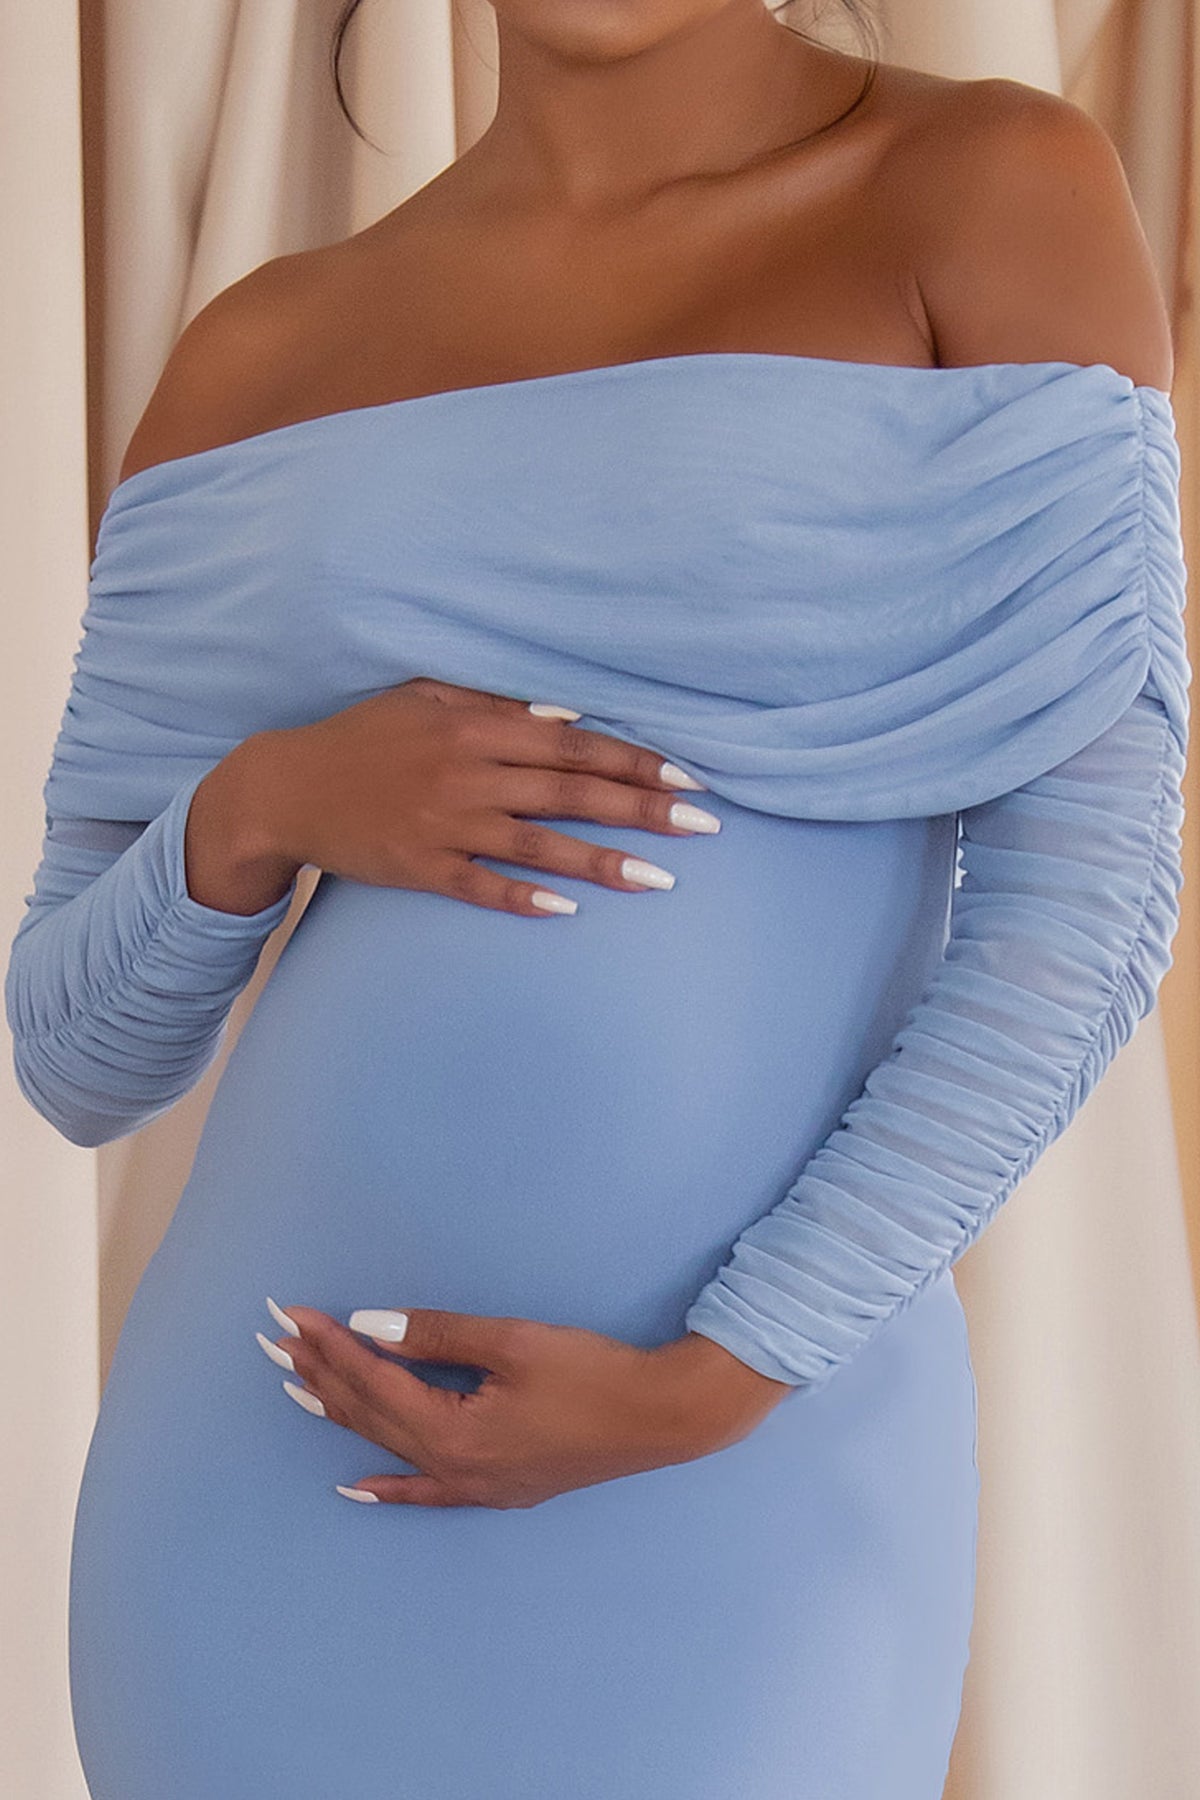 Blue Maternity Gowns – Chic Bump Club